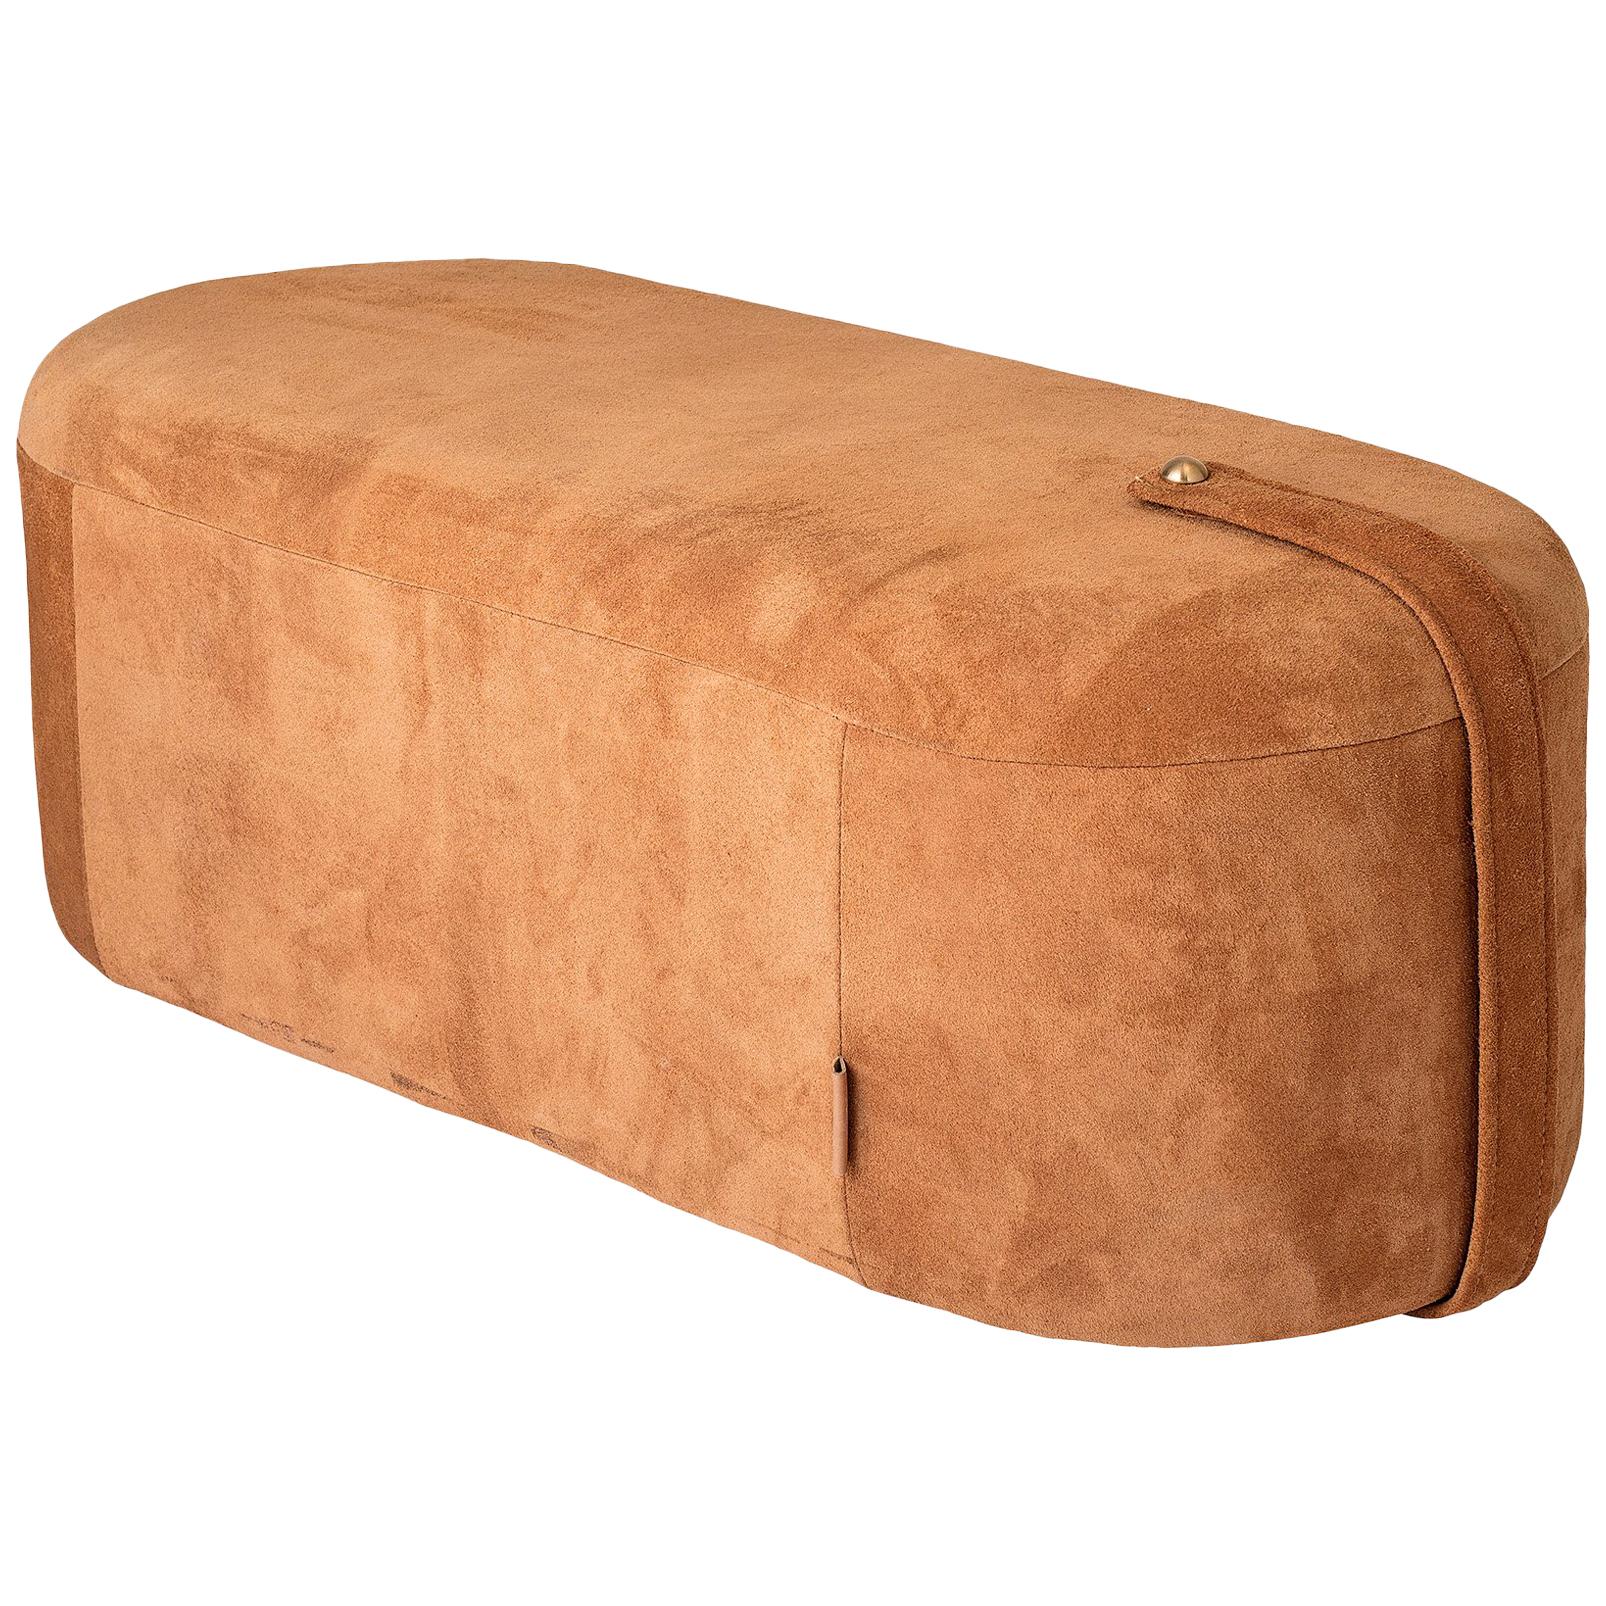 Suede Time Capsule Style Pouf Bench